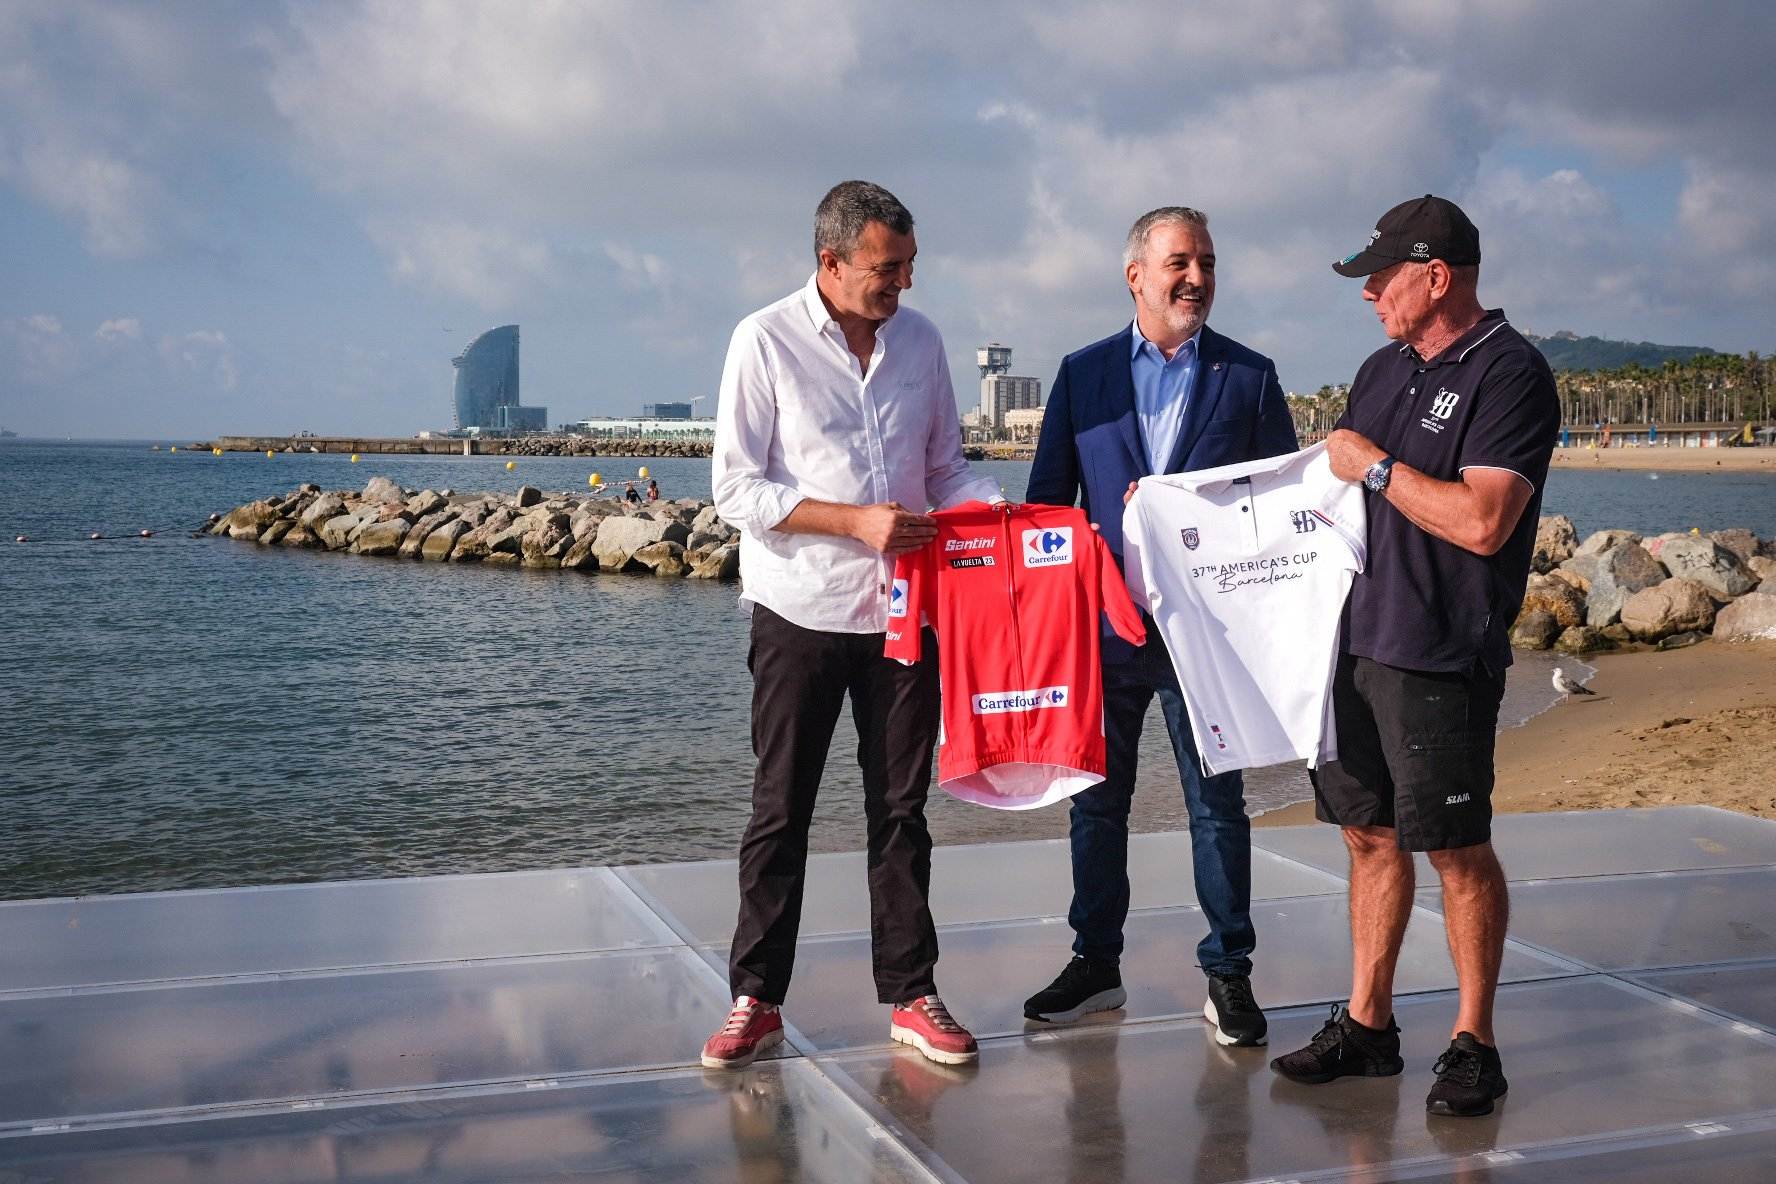 Mayor Collboni embraces a Barcelona of big events: cycling's Vuelta and yachting's America's Cup